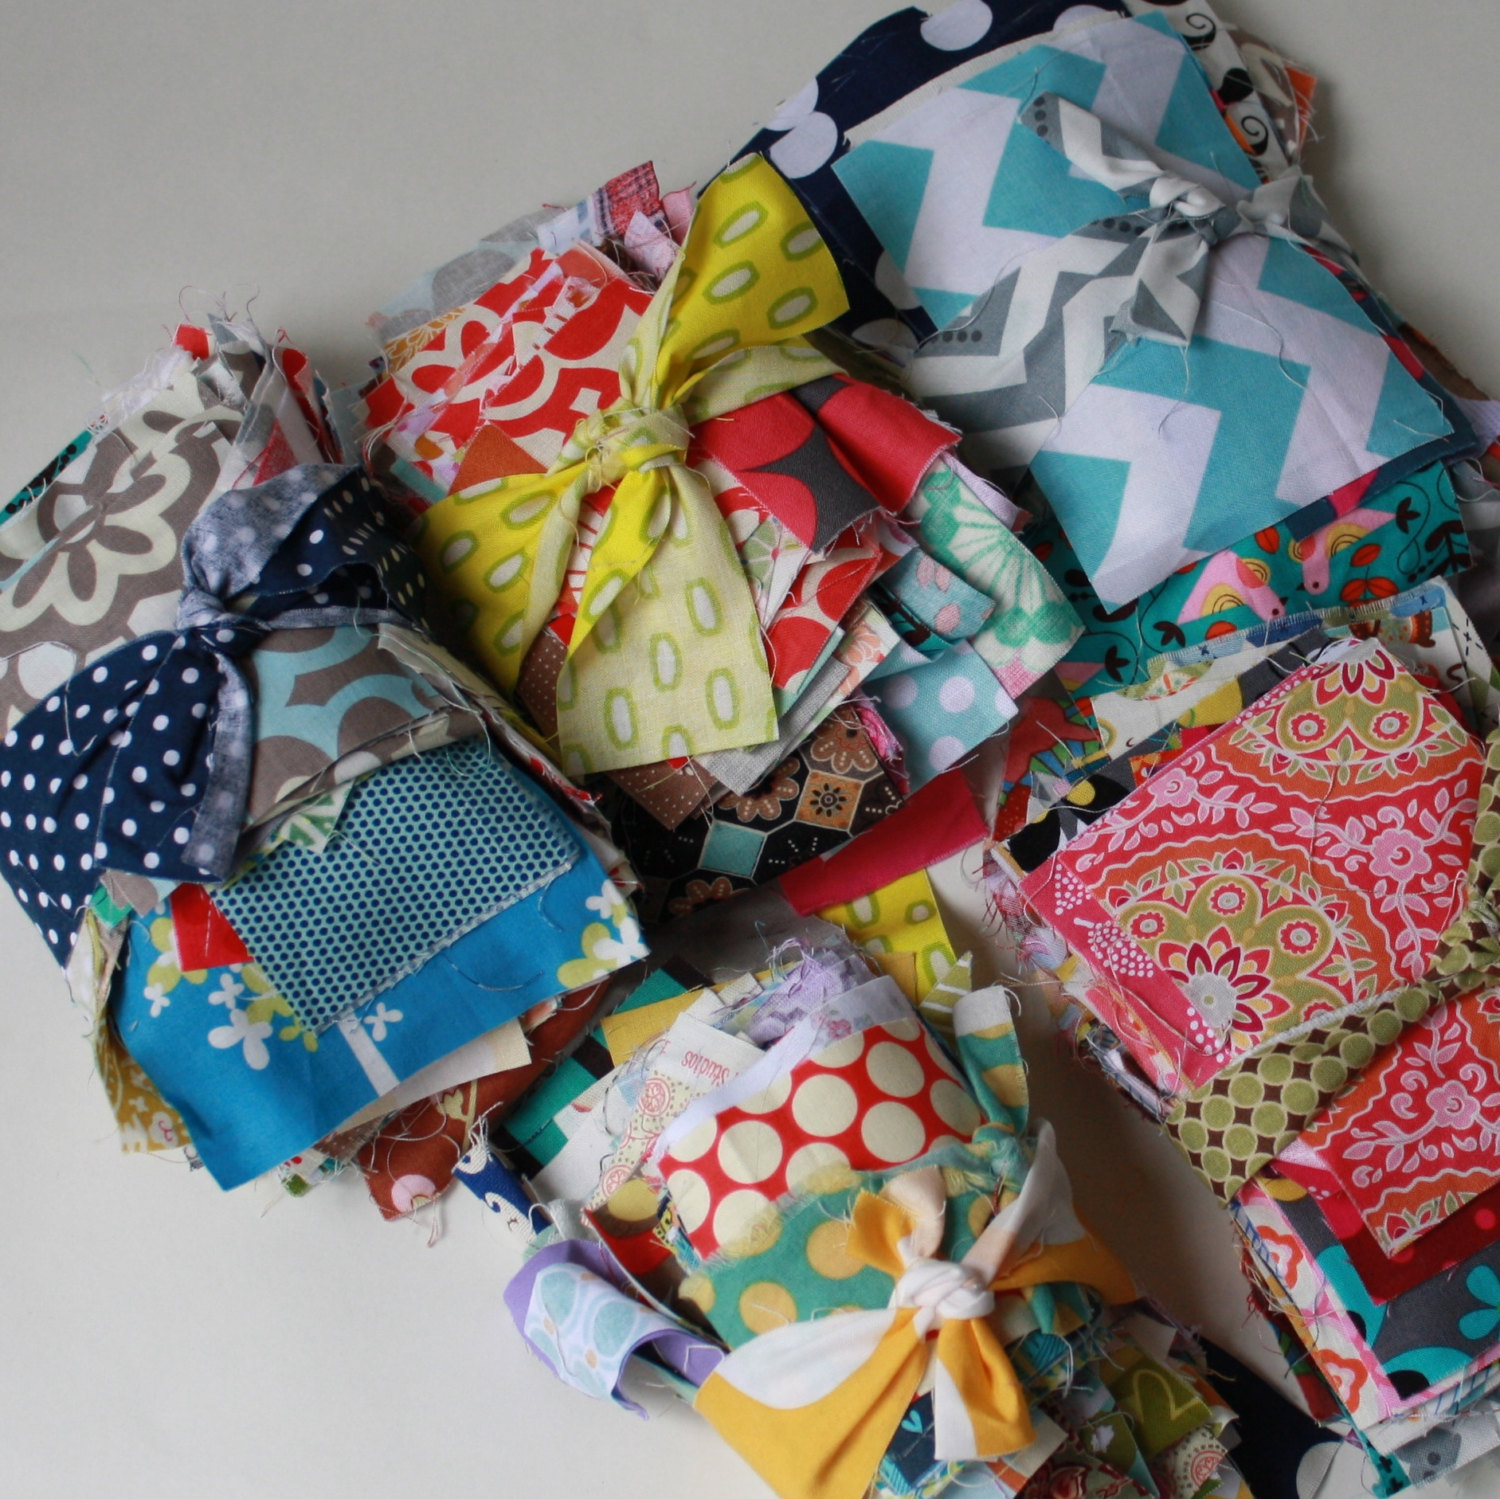 Scrap Pack - Small Scrap Fabric pieces - Equal to One Yard or More by Weight